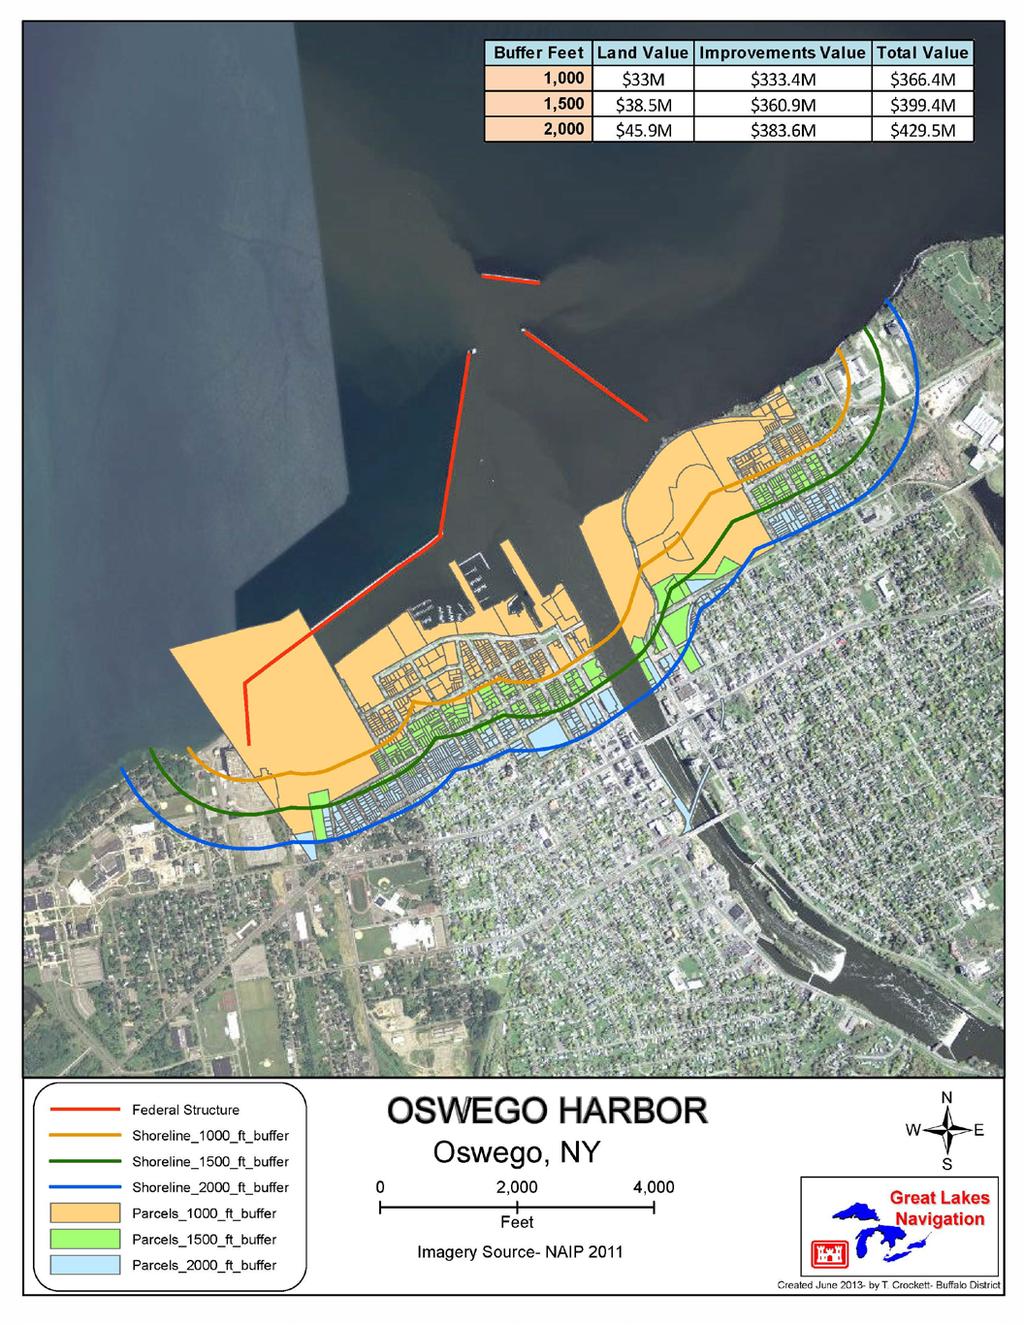 Potential Impact Area: The following graphic displays property parcels that could be impacted within various zones defined by different setbacks from the shoreline behind existing Federal coastal